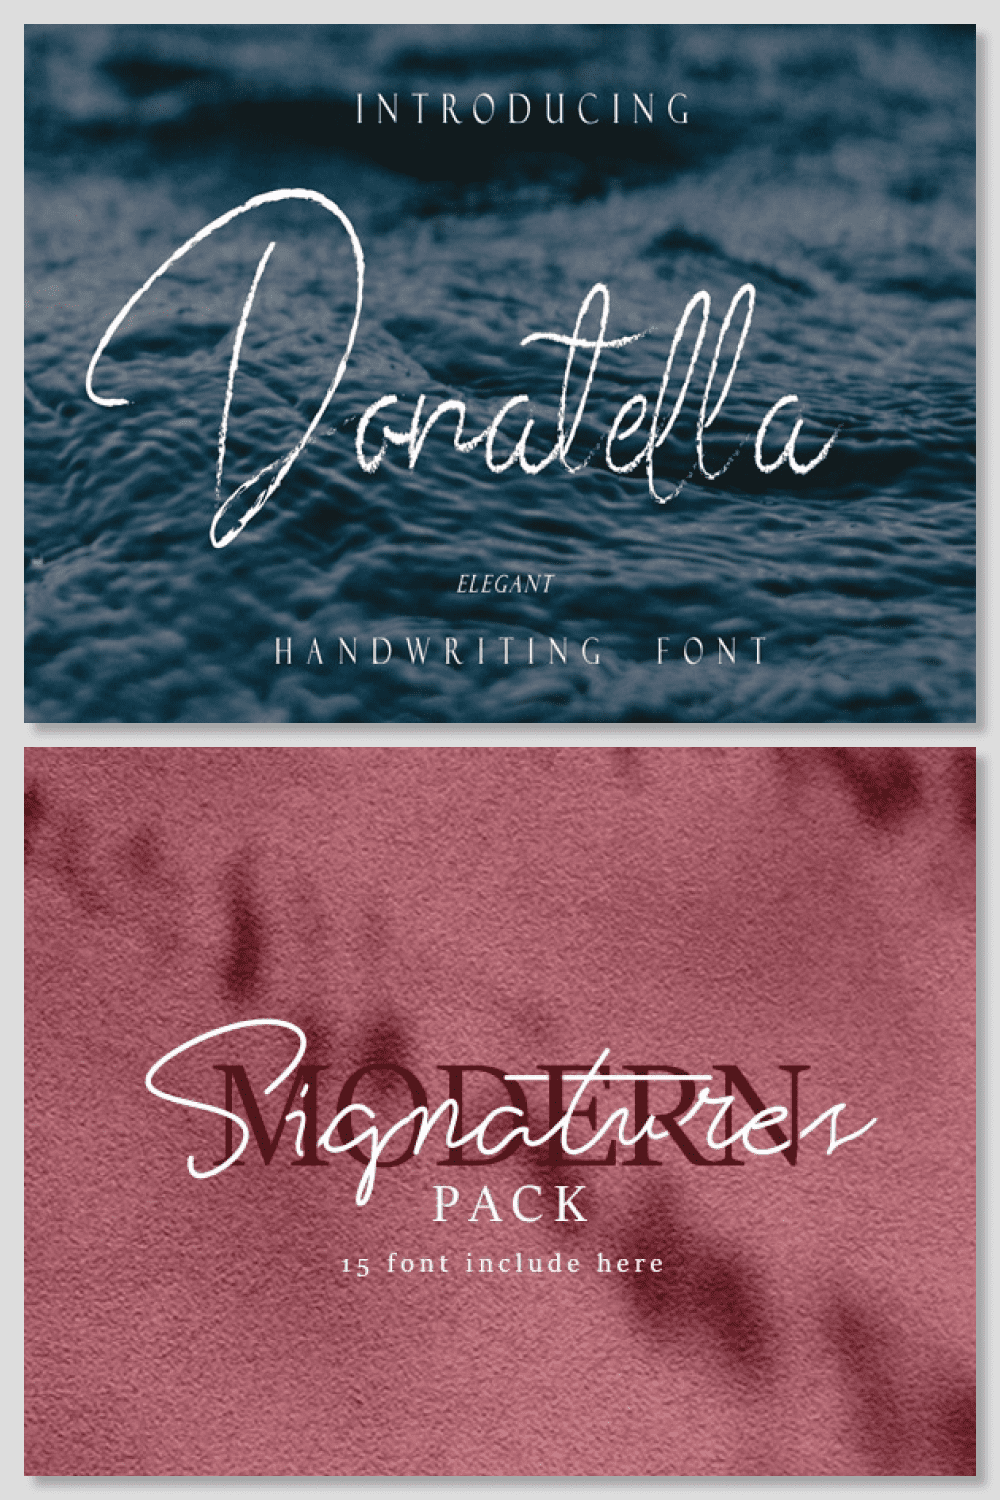 A collage of examples of writing a font on a pink and blue background.